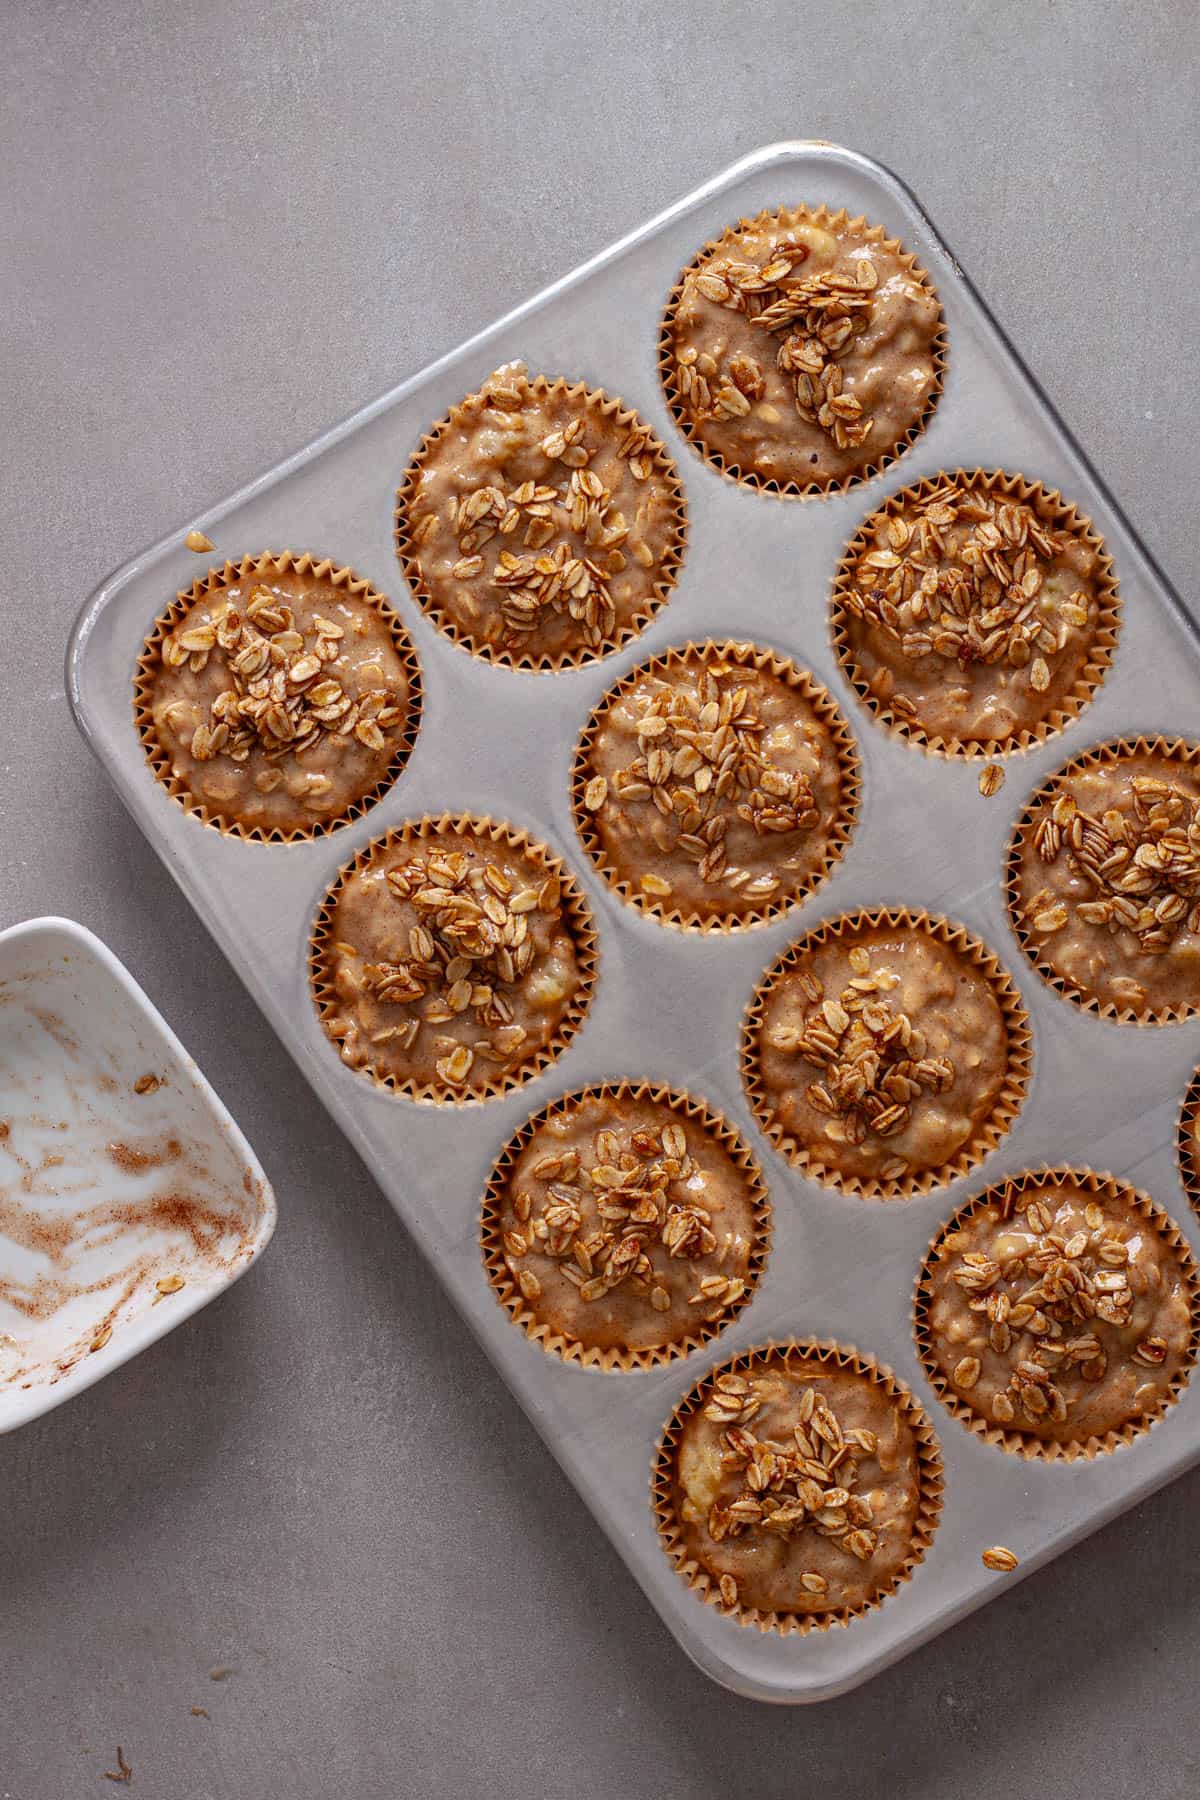 A crispy oat topping added to the top of uncooked oat banana muffins.